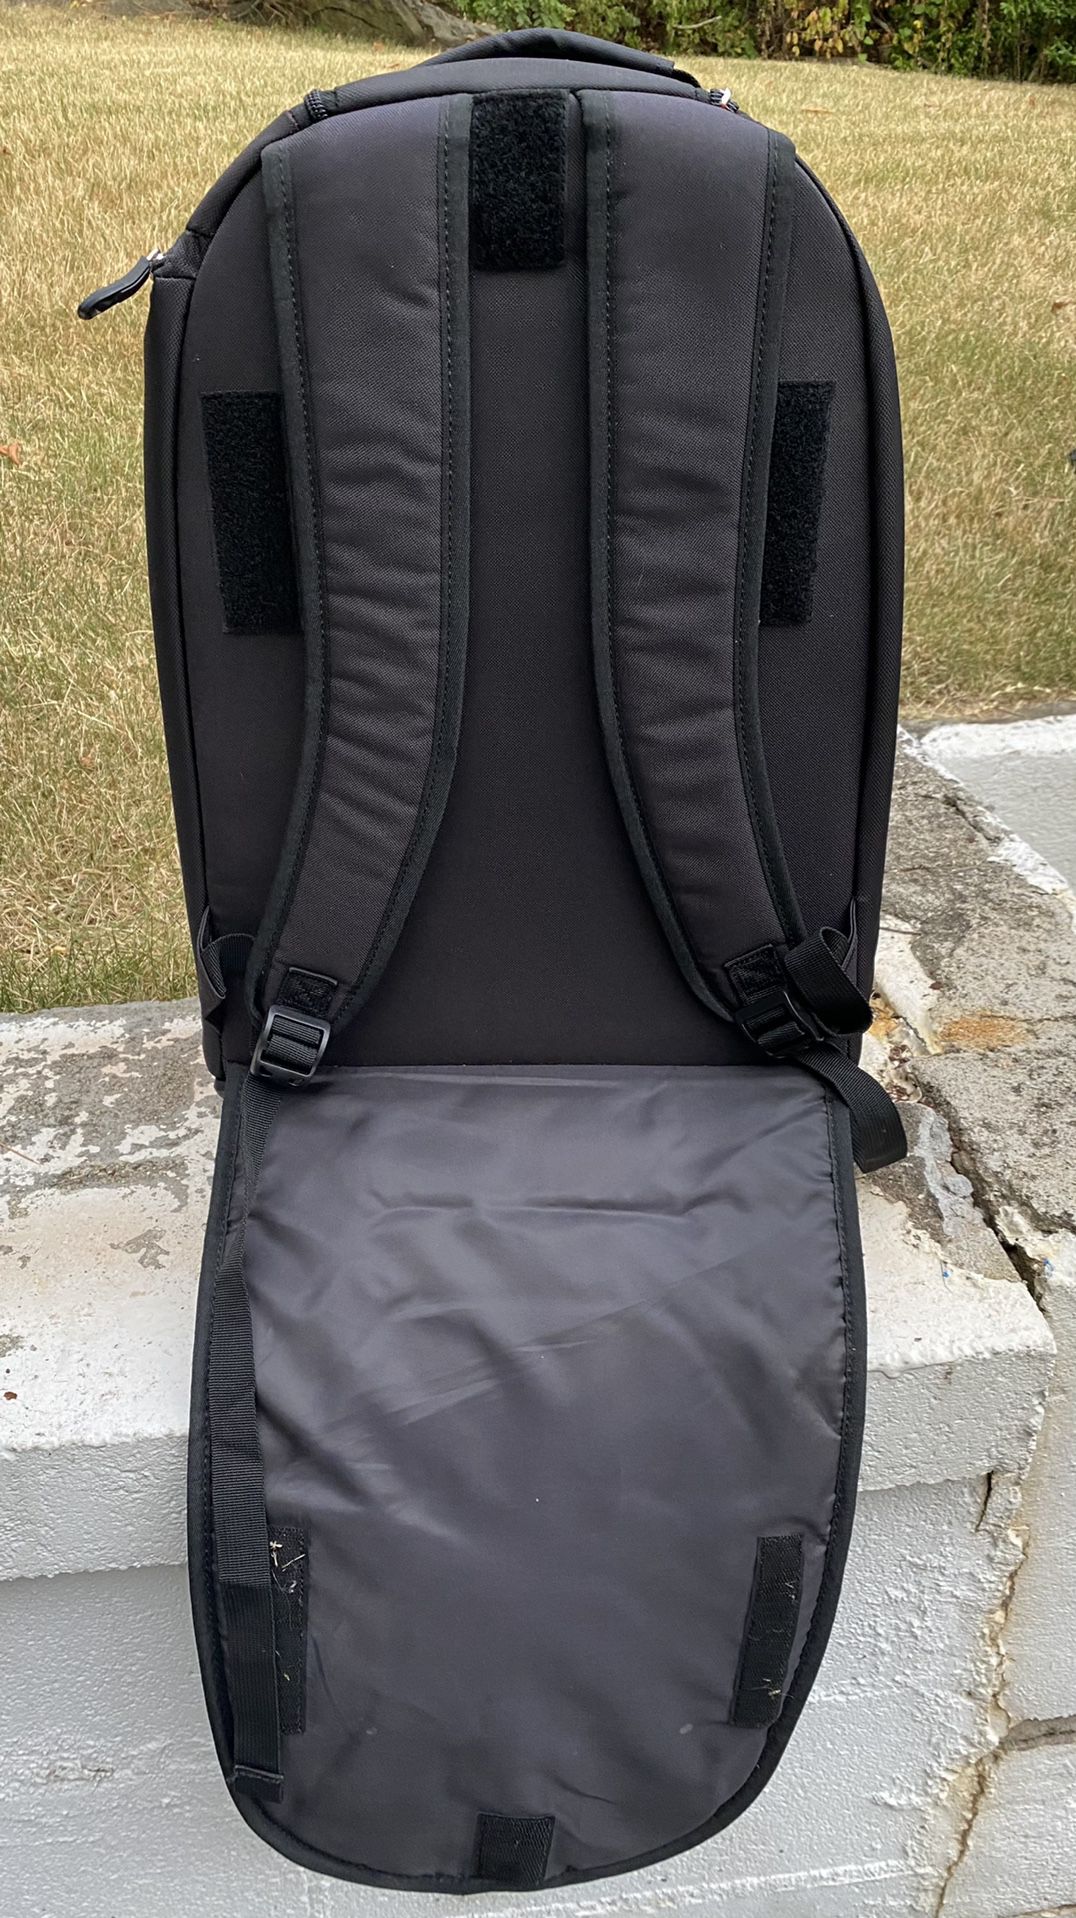 Samsonite MVS Rolling Backpack, Black, 19-Inch…With WWF logo on the front! Never used…Two of the zippers have minor damage…SEE PICKS! 